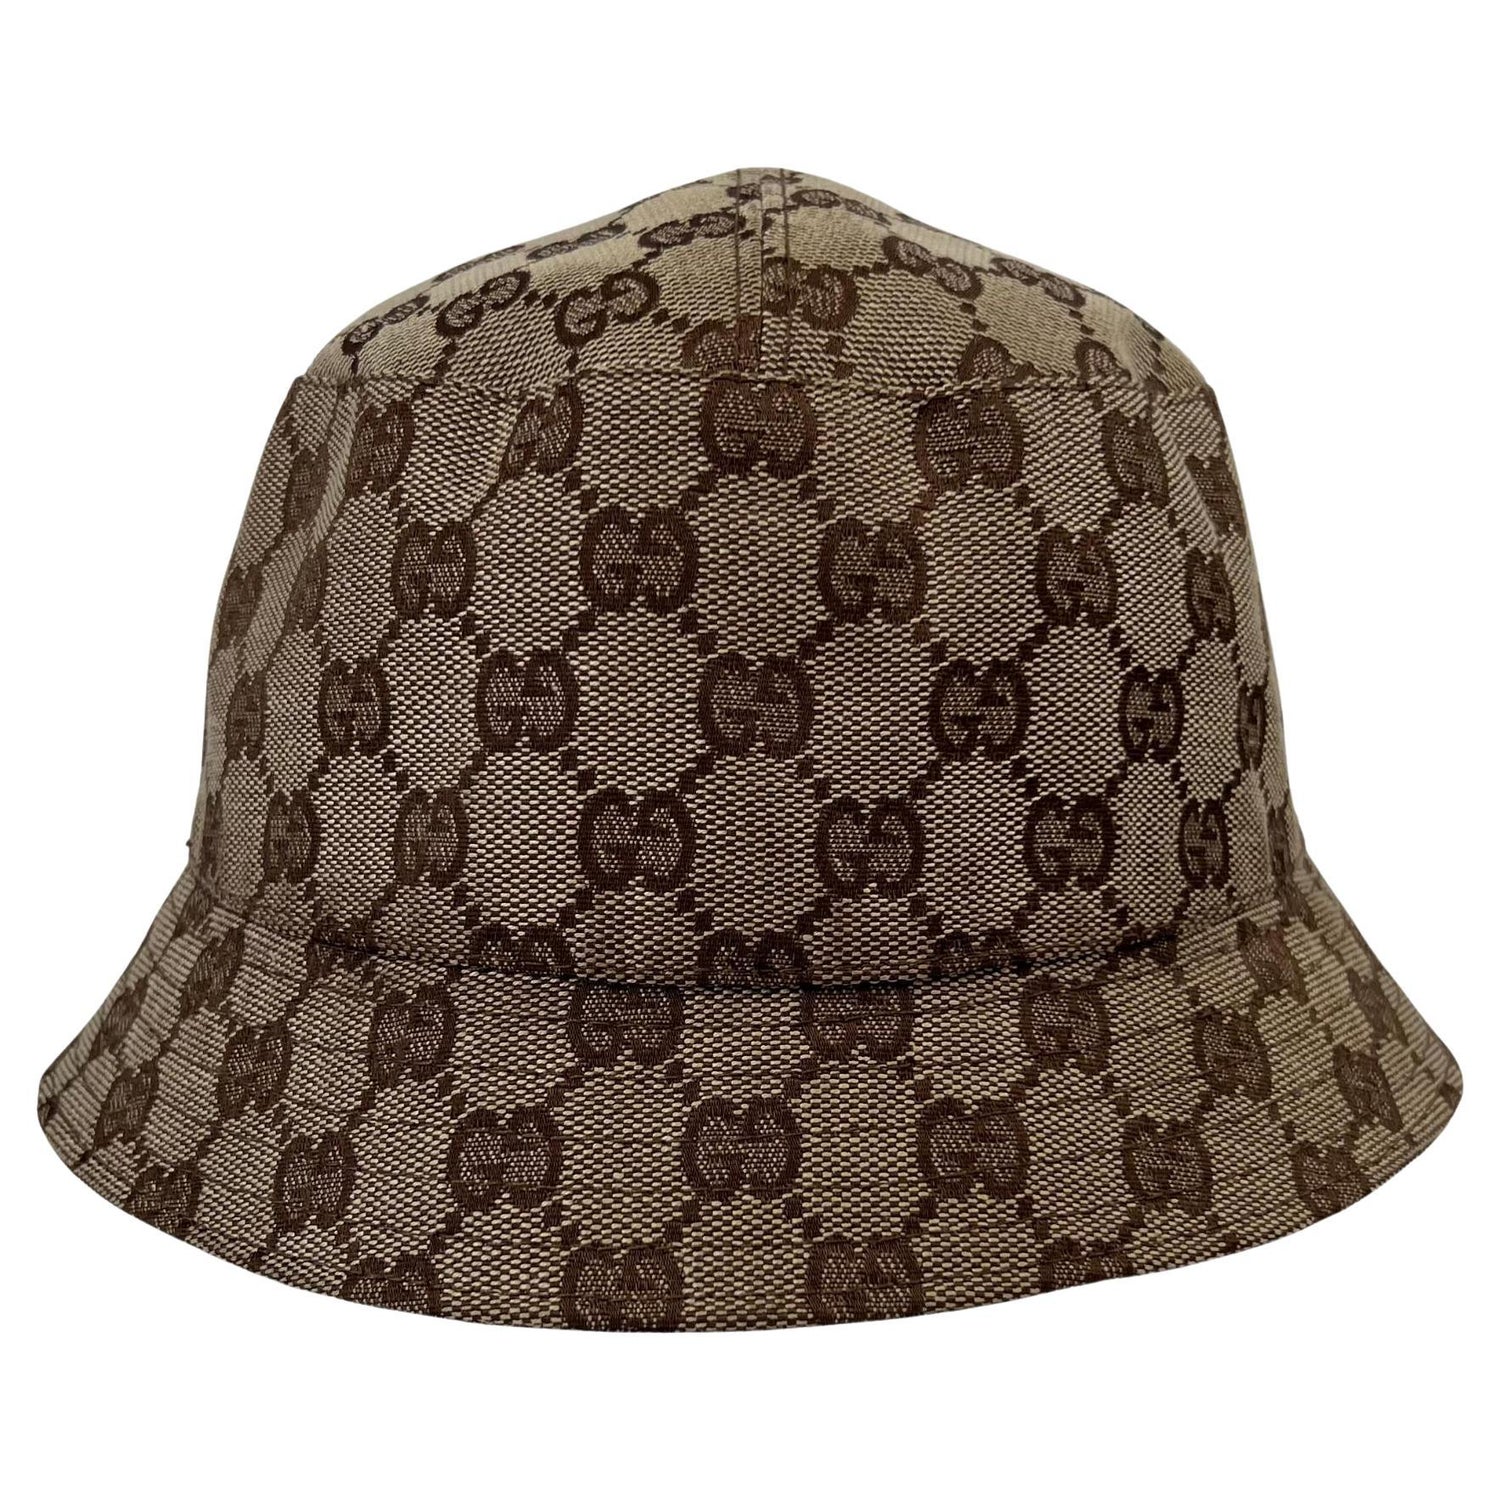 Gucci Bucket Hat Used - 8 For Sale on 1stDibs